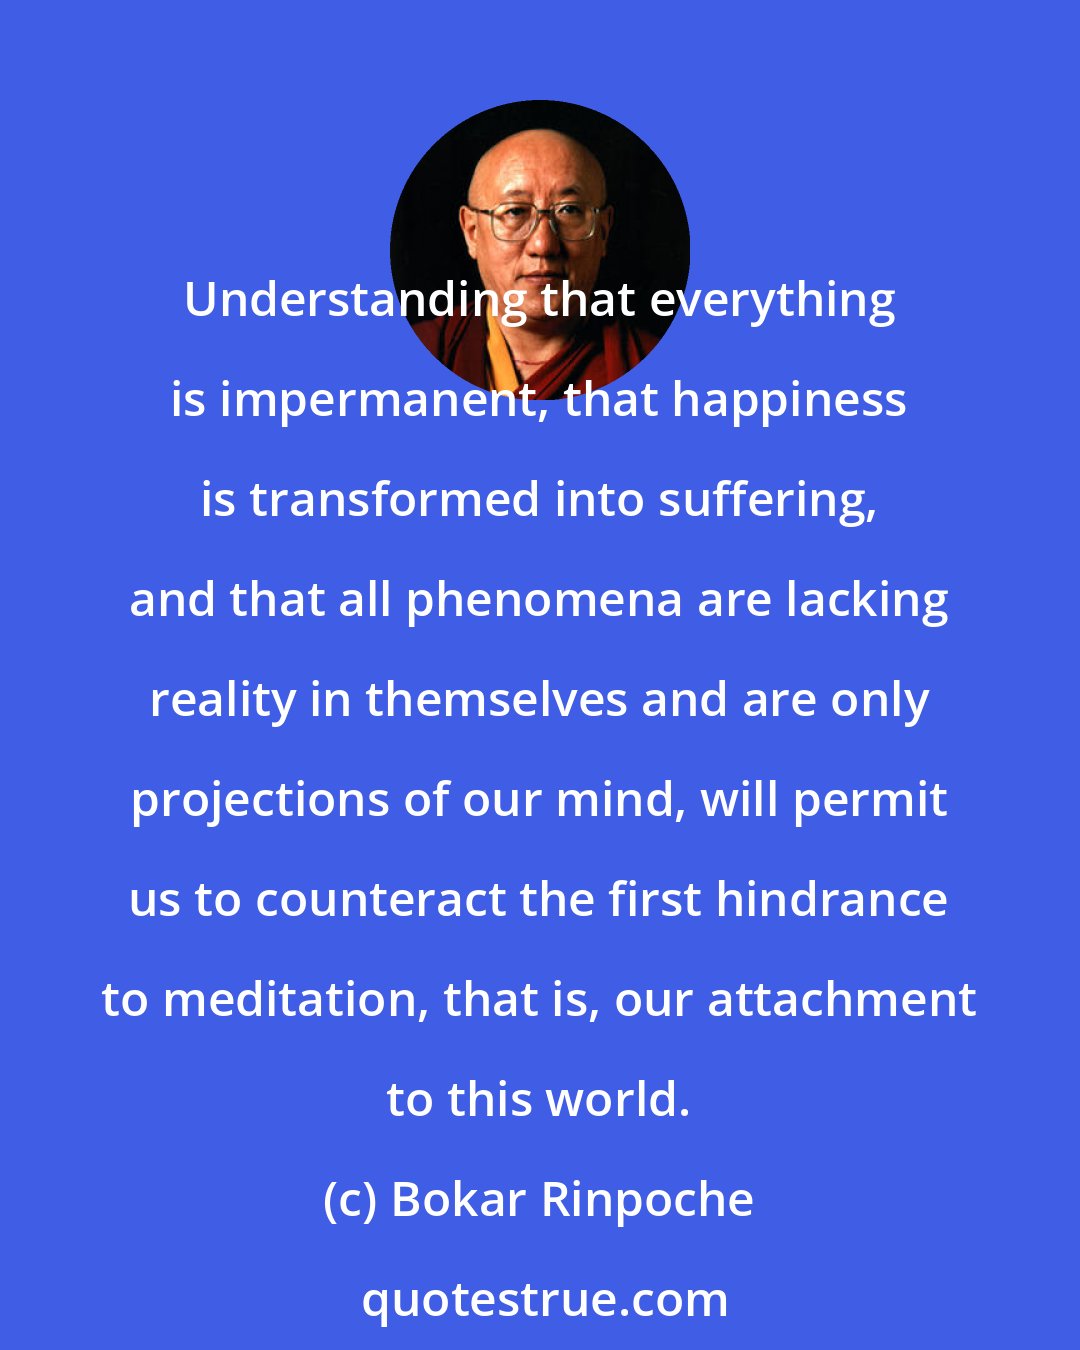 Bokar Rinpoche: Understanding that everything is impermanent, that happiness is transformed into suffering, and that all phenomena are lacking reality in themselves and are only projections of our mind, will permit us to counteract the first hindrance to meditation, that is, our attachment to this world.